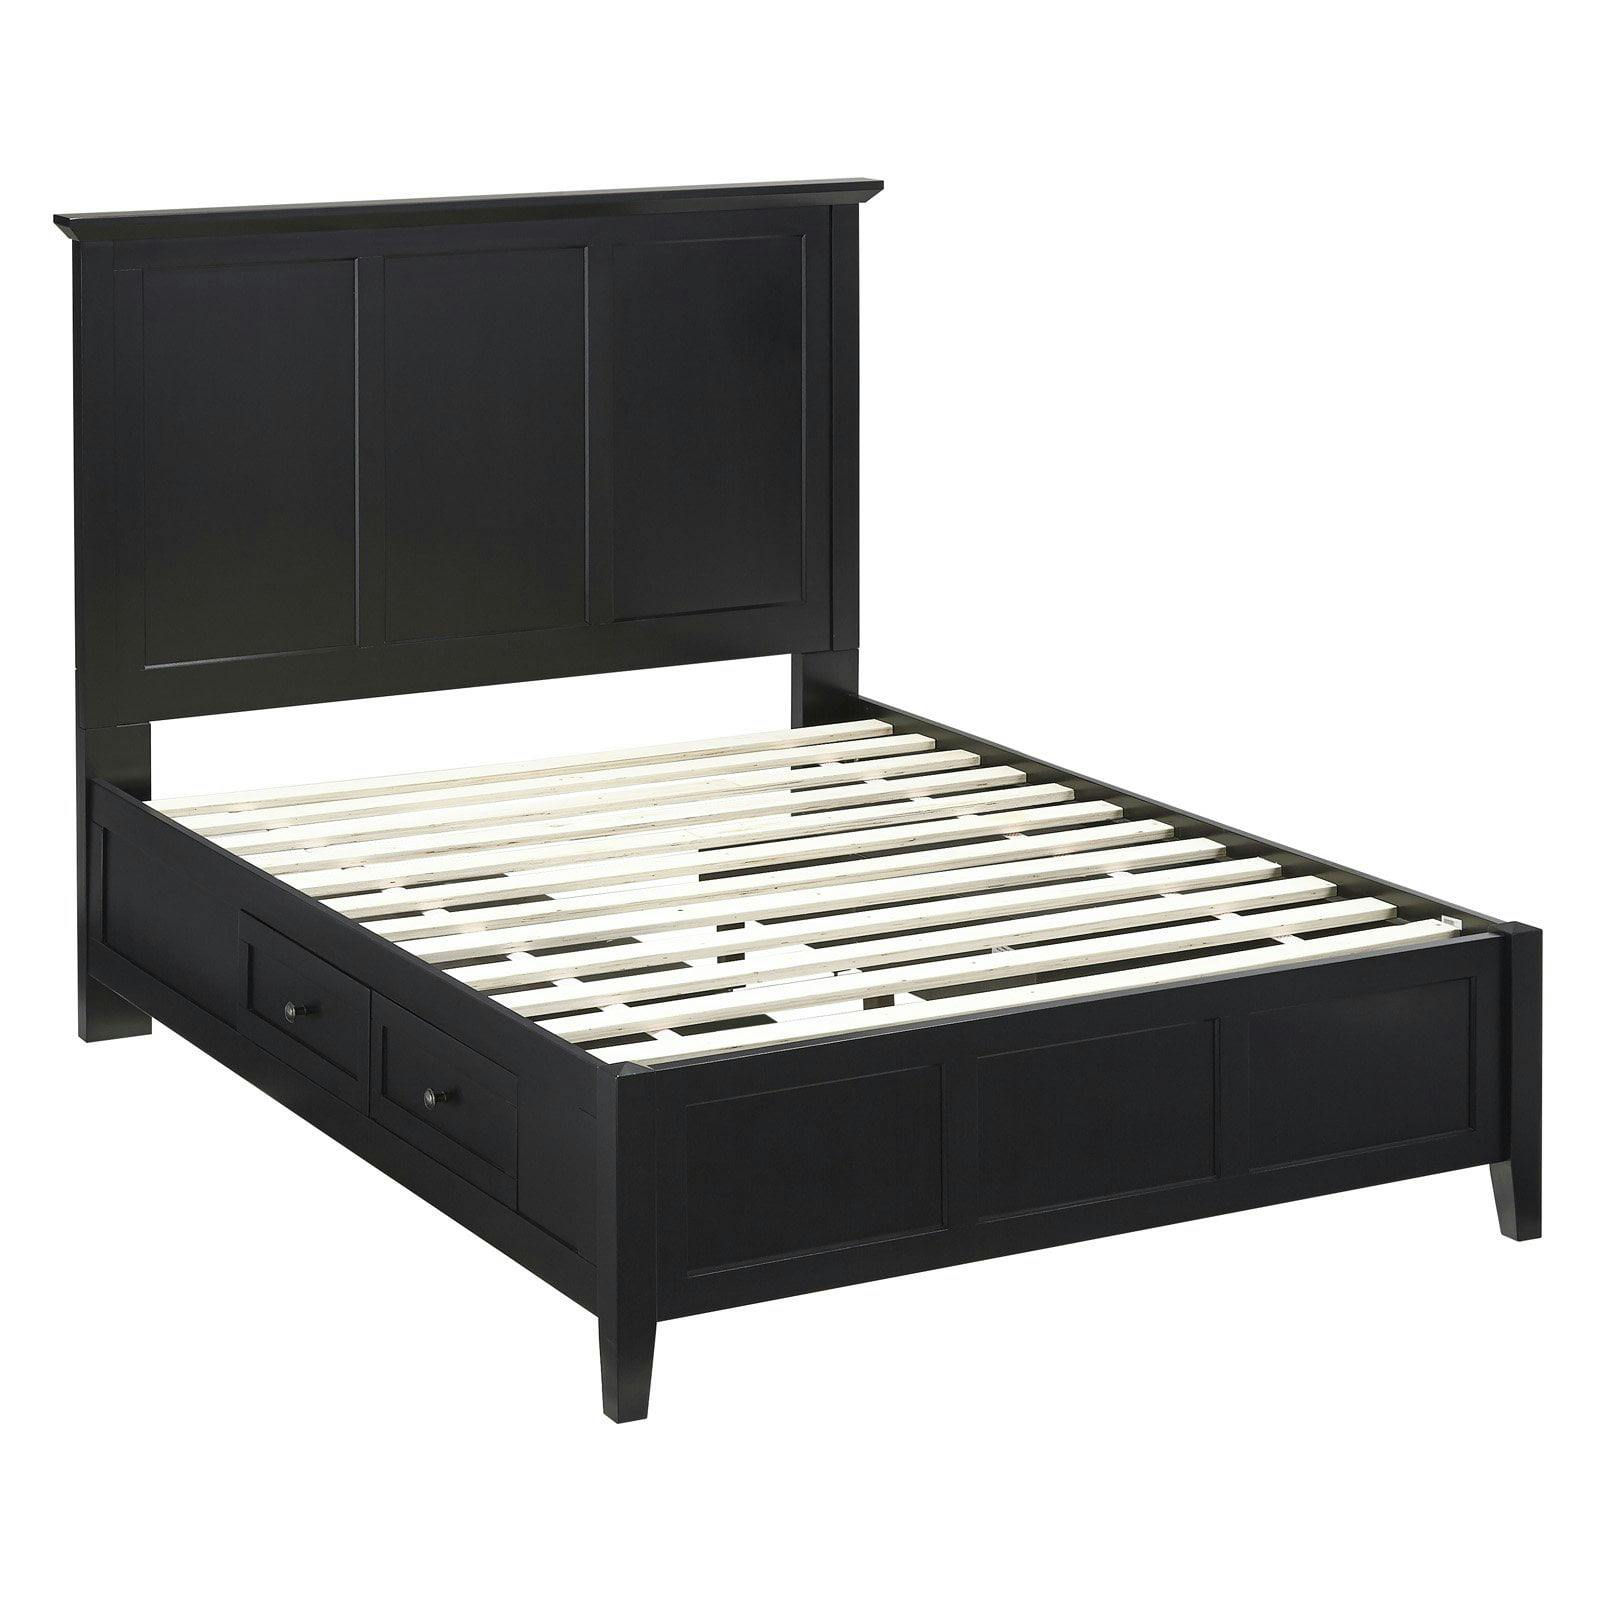 Shaker-Inspired California King Black Wood Storage Bed with 4 Drawers